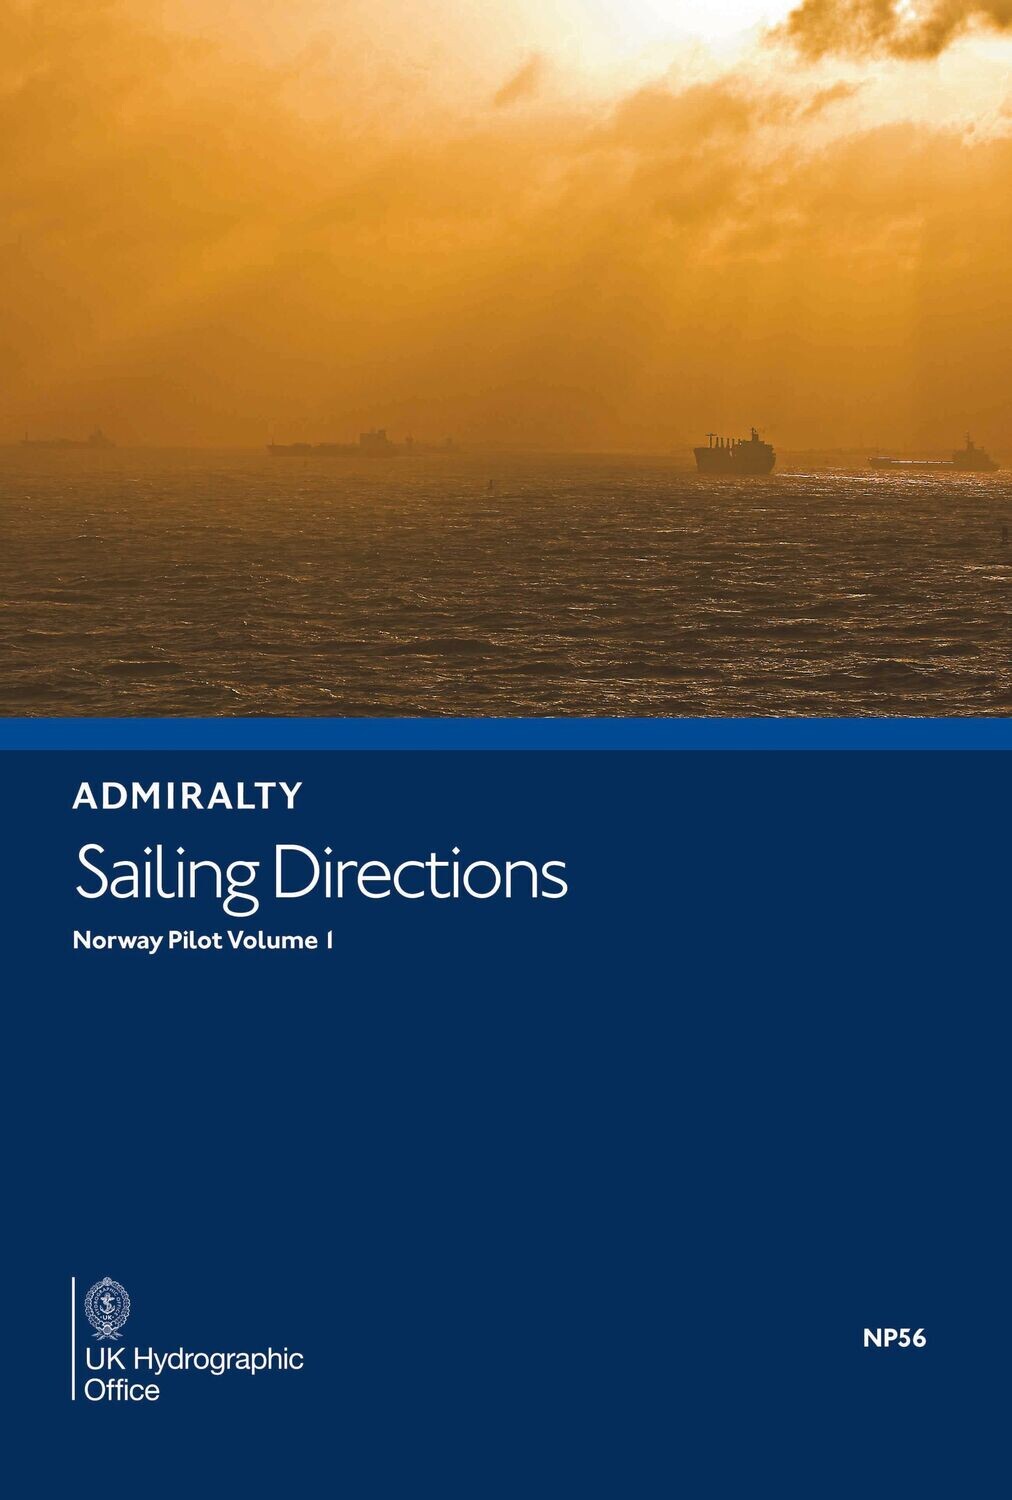 NP56 ADMIRALTY Sailing Directions - Norway Pilot Vol 1